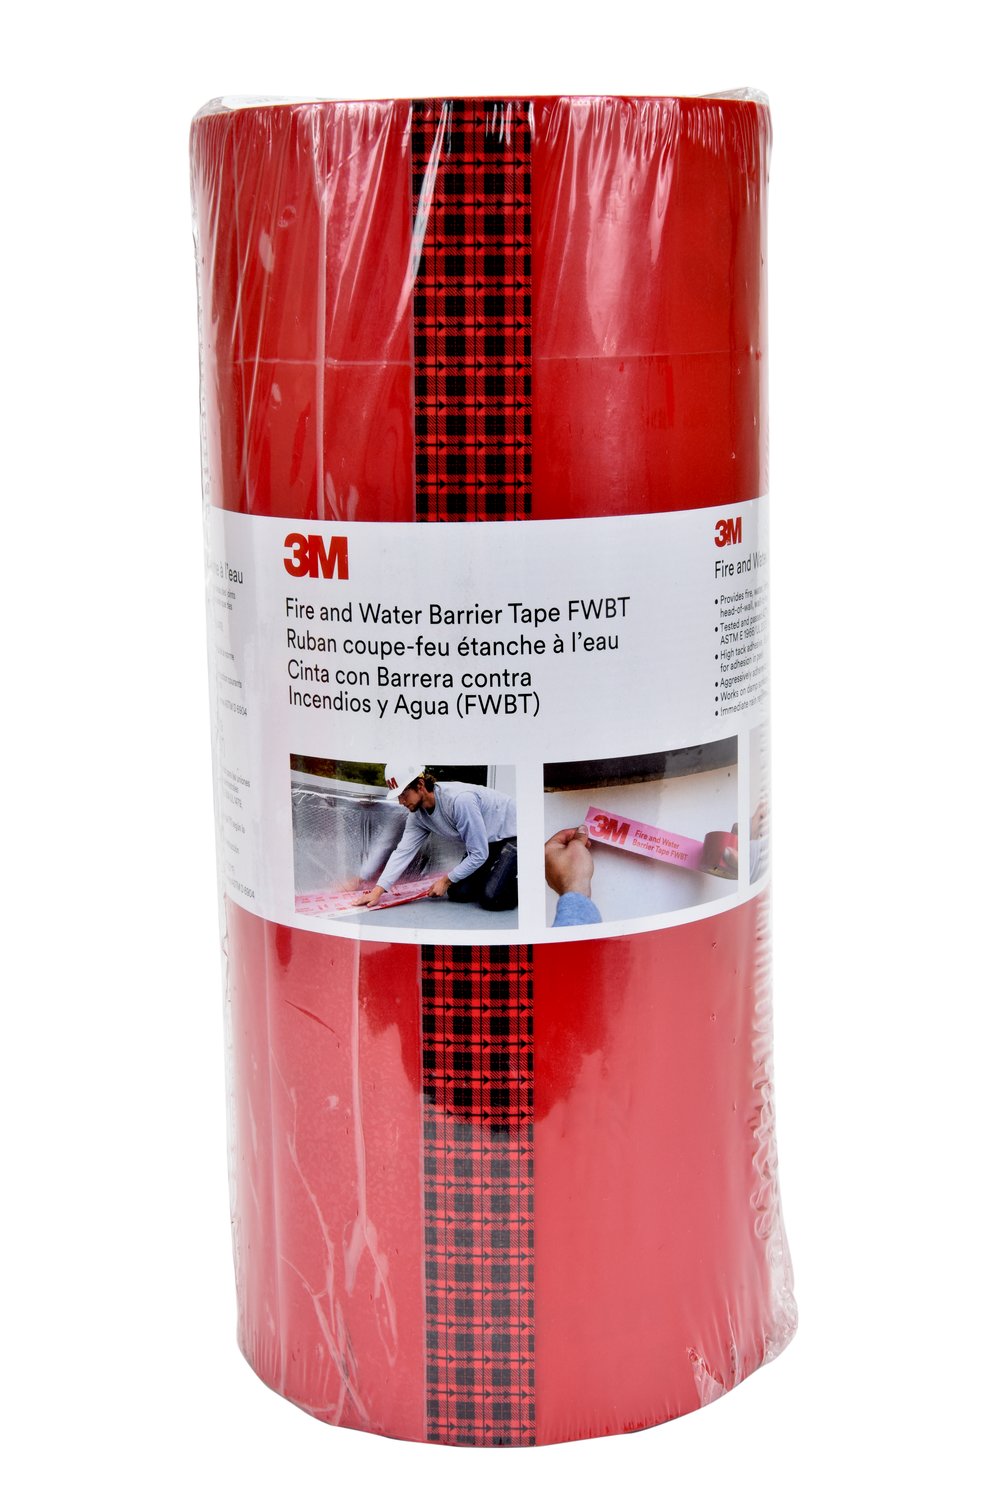 7010401347 - 3M Fire and Water Barrier Tape FWBT12, Translucent, 12 in x 75 ft, 4
Each/Case